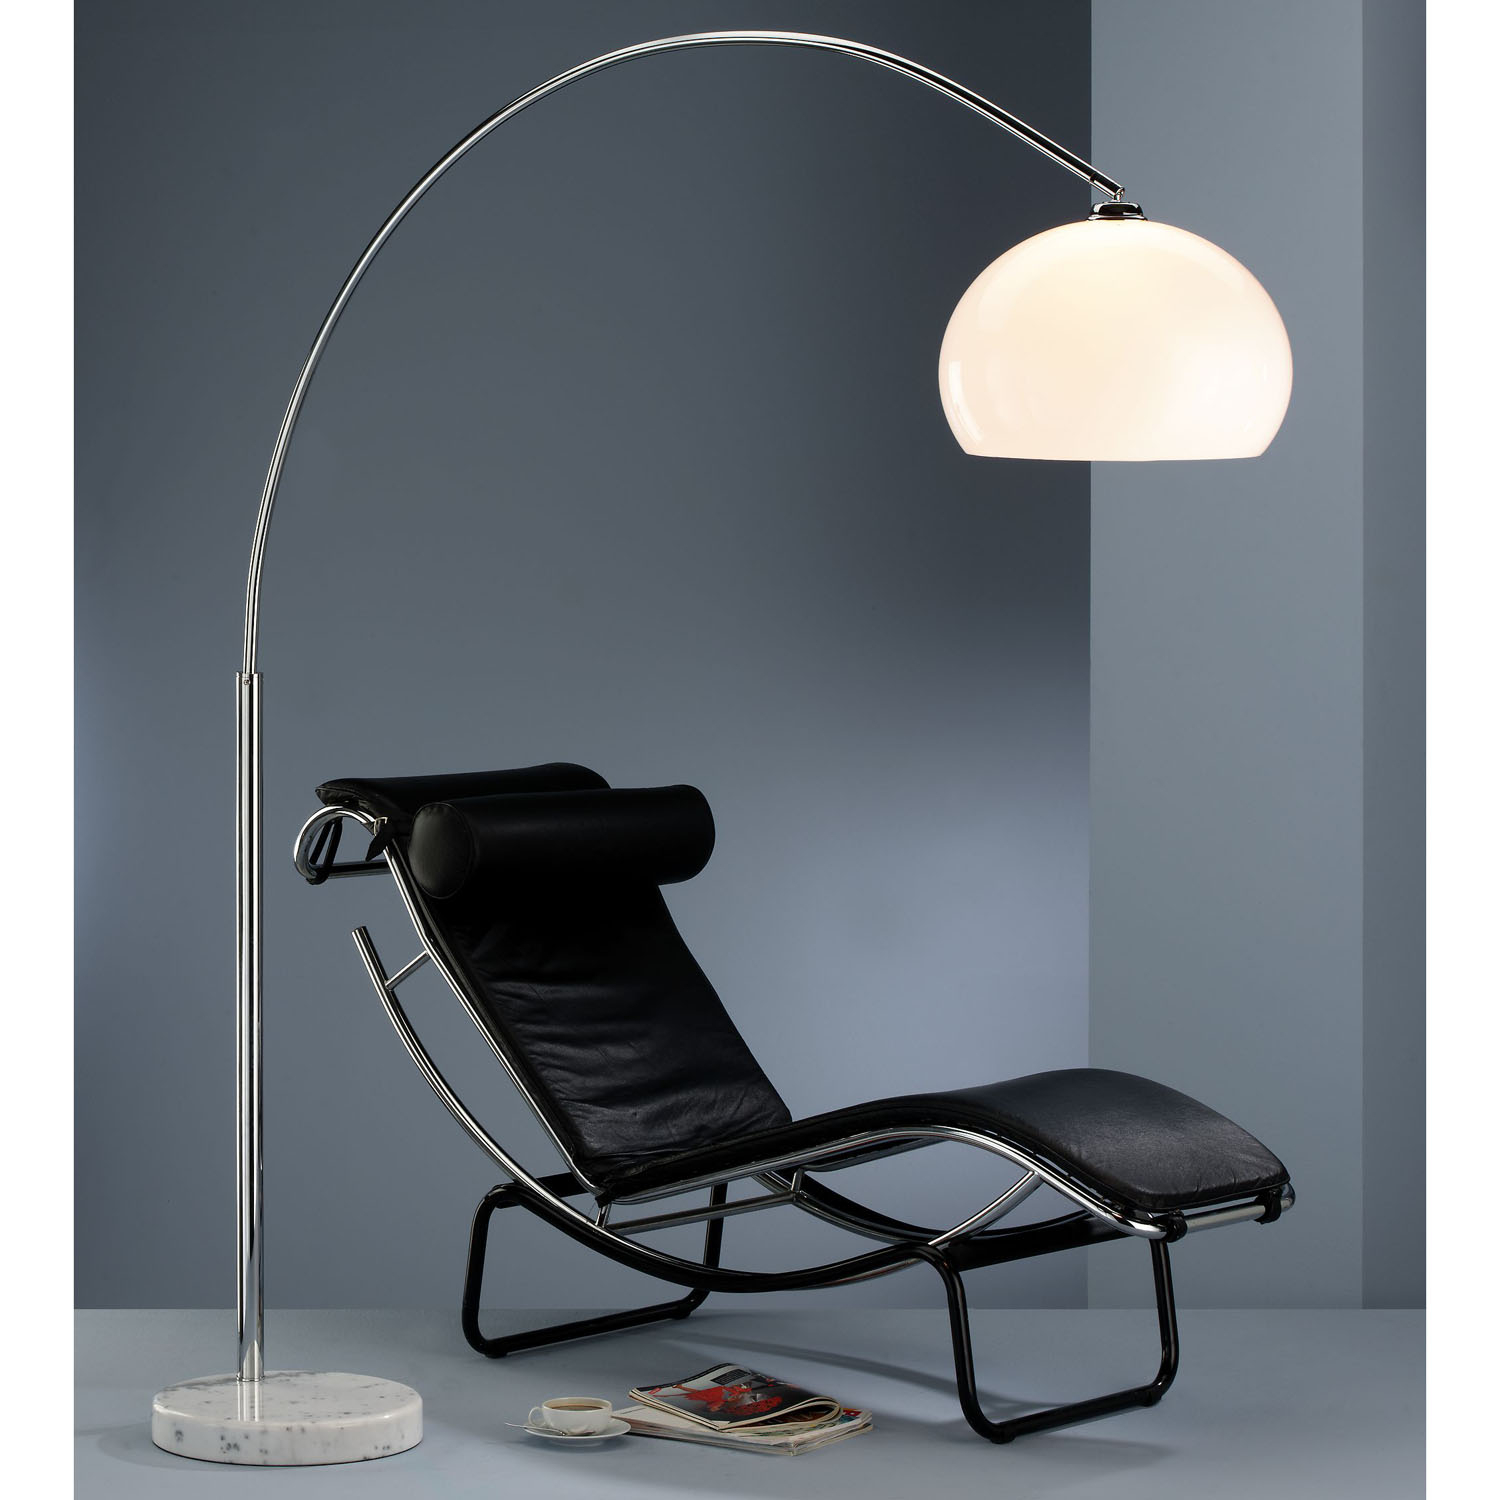 Torchiere Floor Lamp Halogen Disacode Home Design From throughout dimensions 1500 X 1500